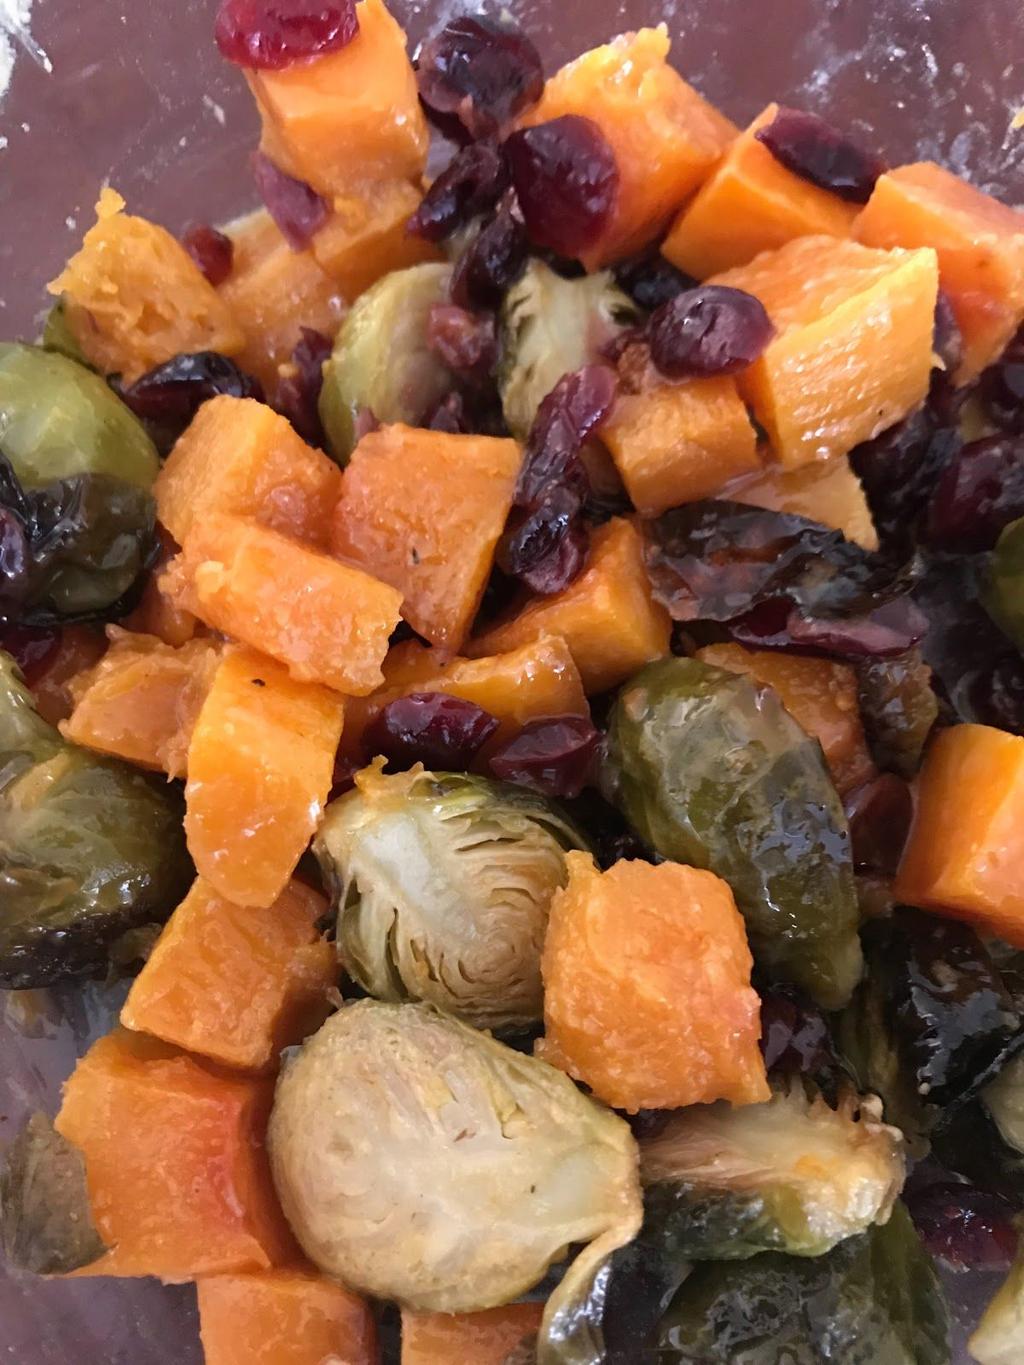 Butternut Squash, dried cranberry and brussel sprout side 1 Pound brussel sprouts, cut in half 1 Pound butternut squash, cut into cubes ¼ cup dried cranberries 4 tablespoons Olive oil 1 Tablespoon